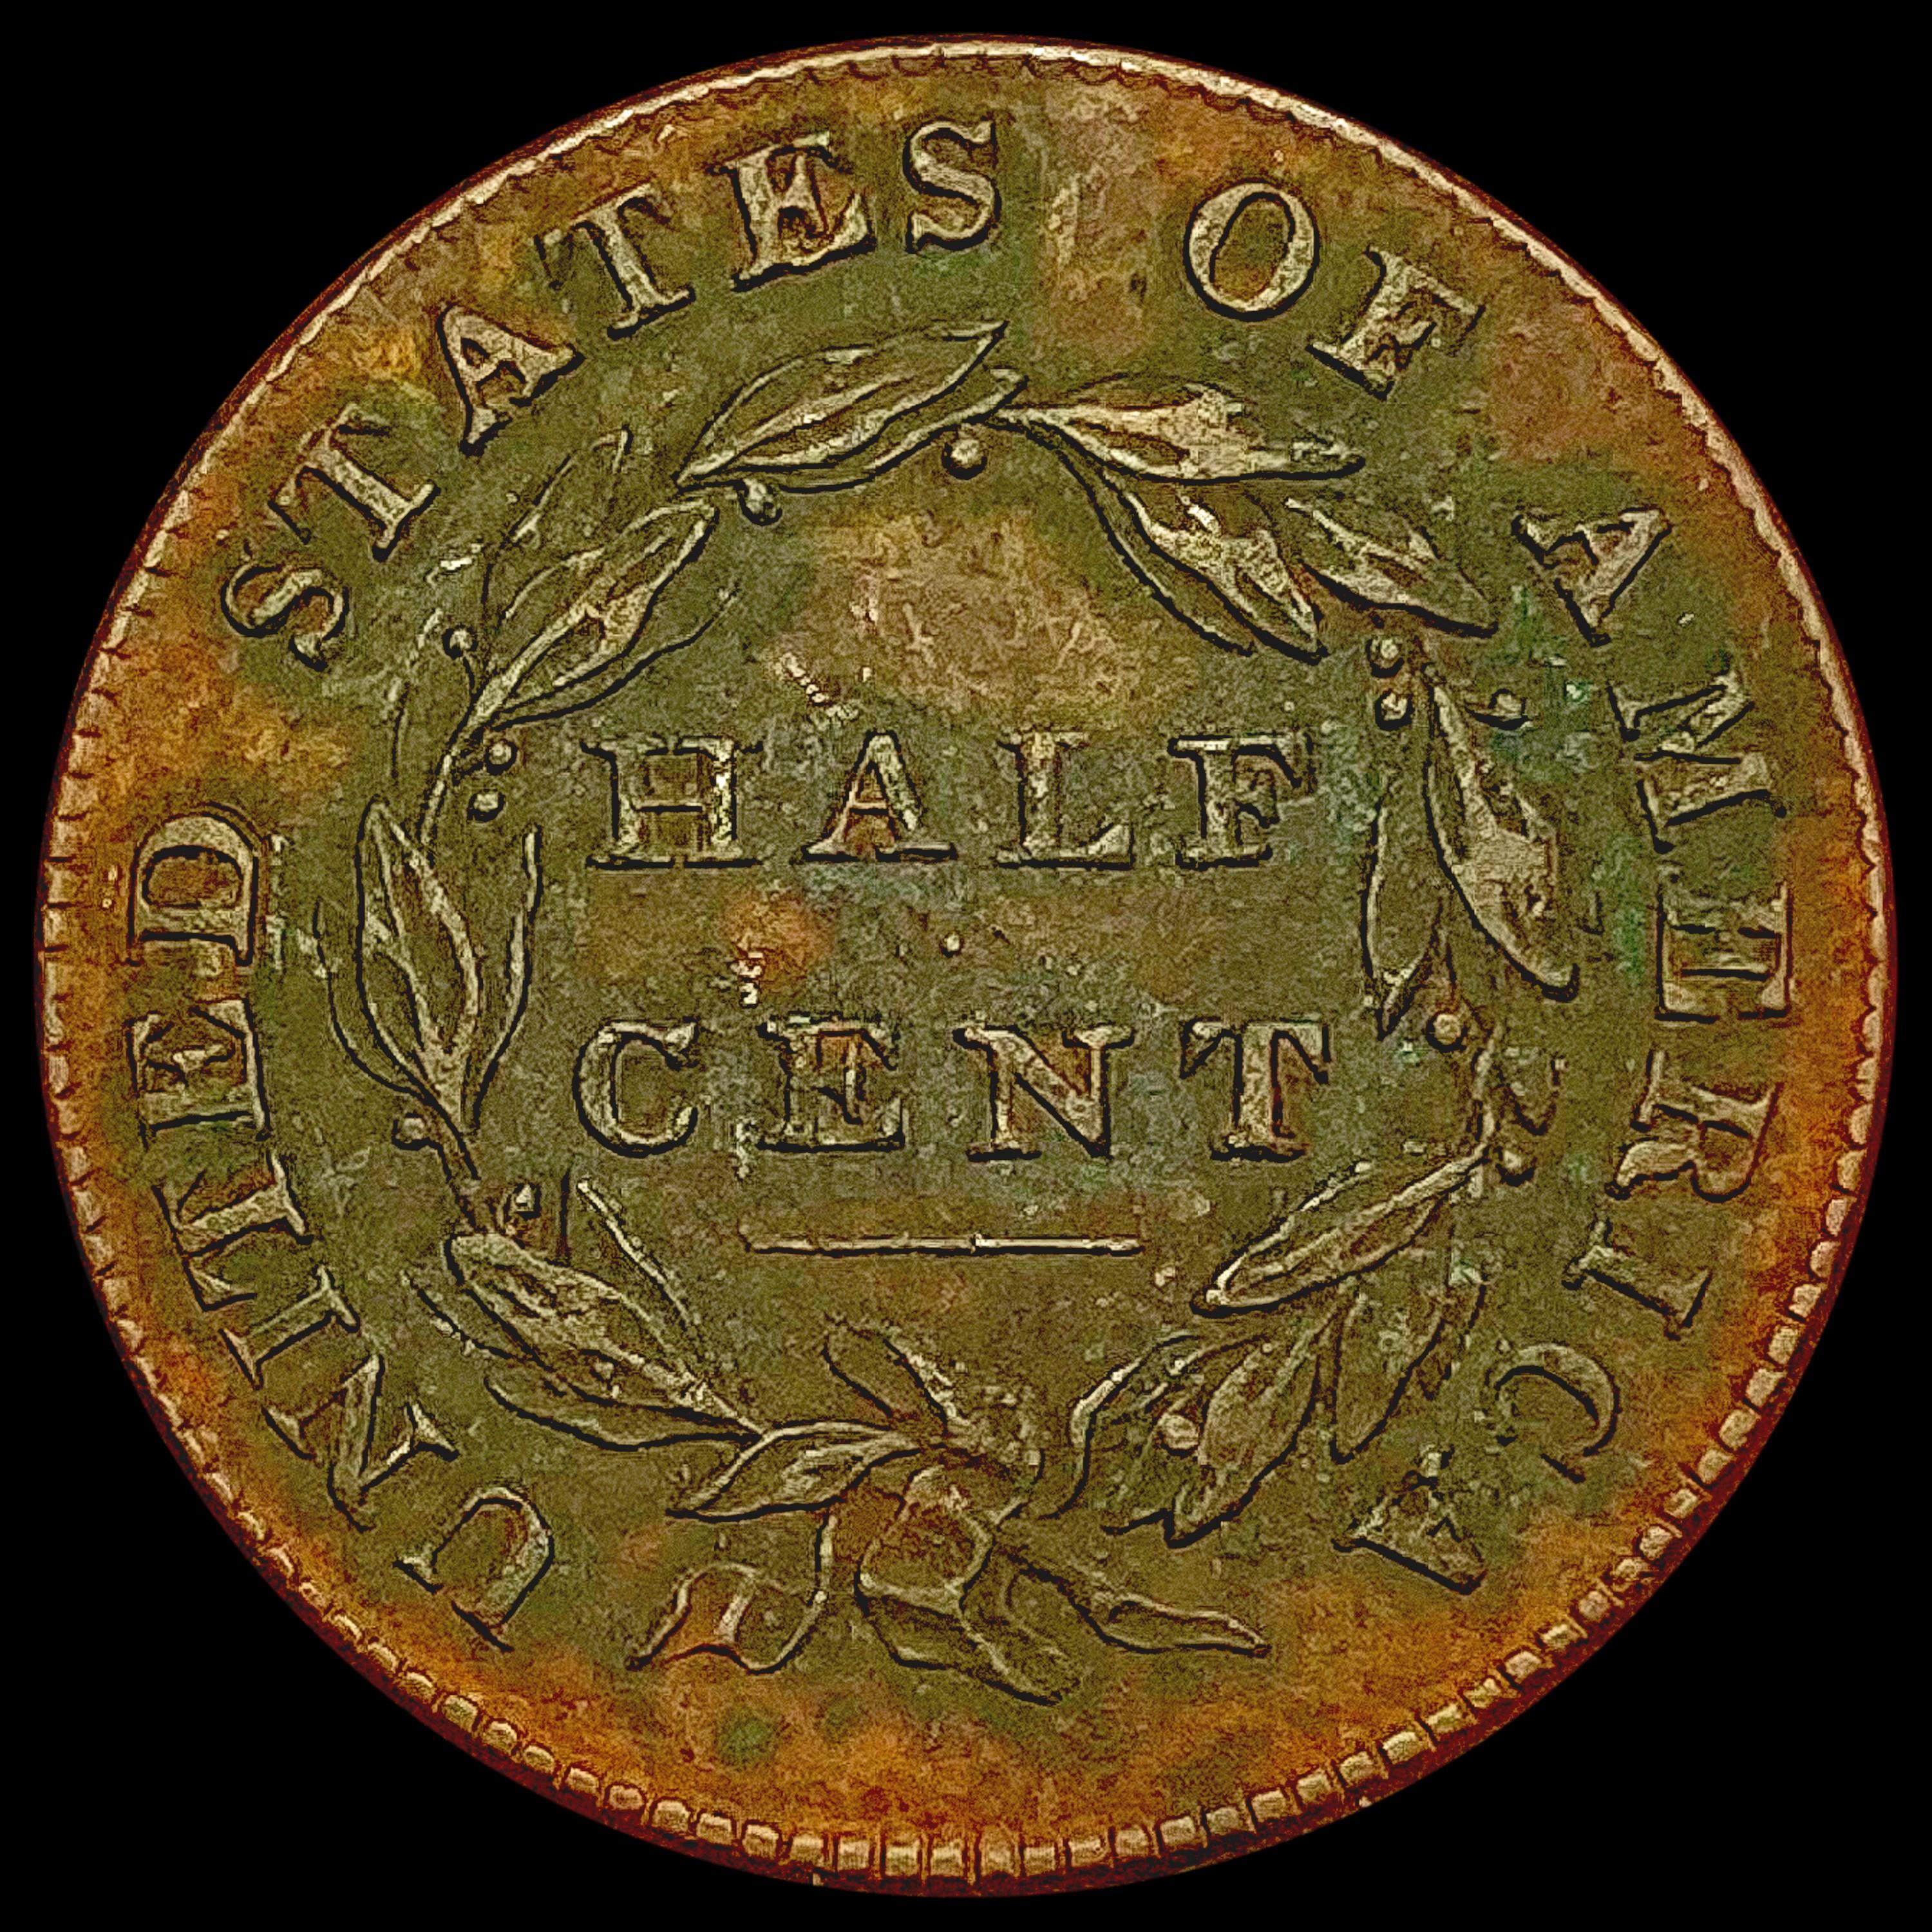 1832 Classic Head Half Cent CLOSELY UNCIRCULATED